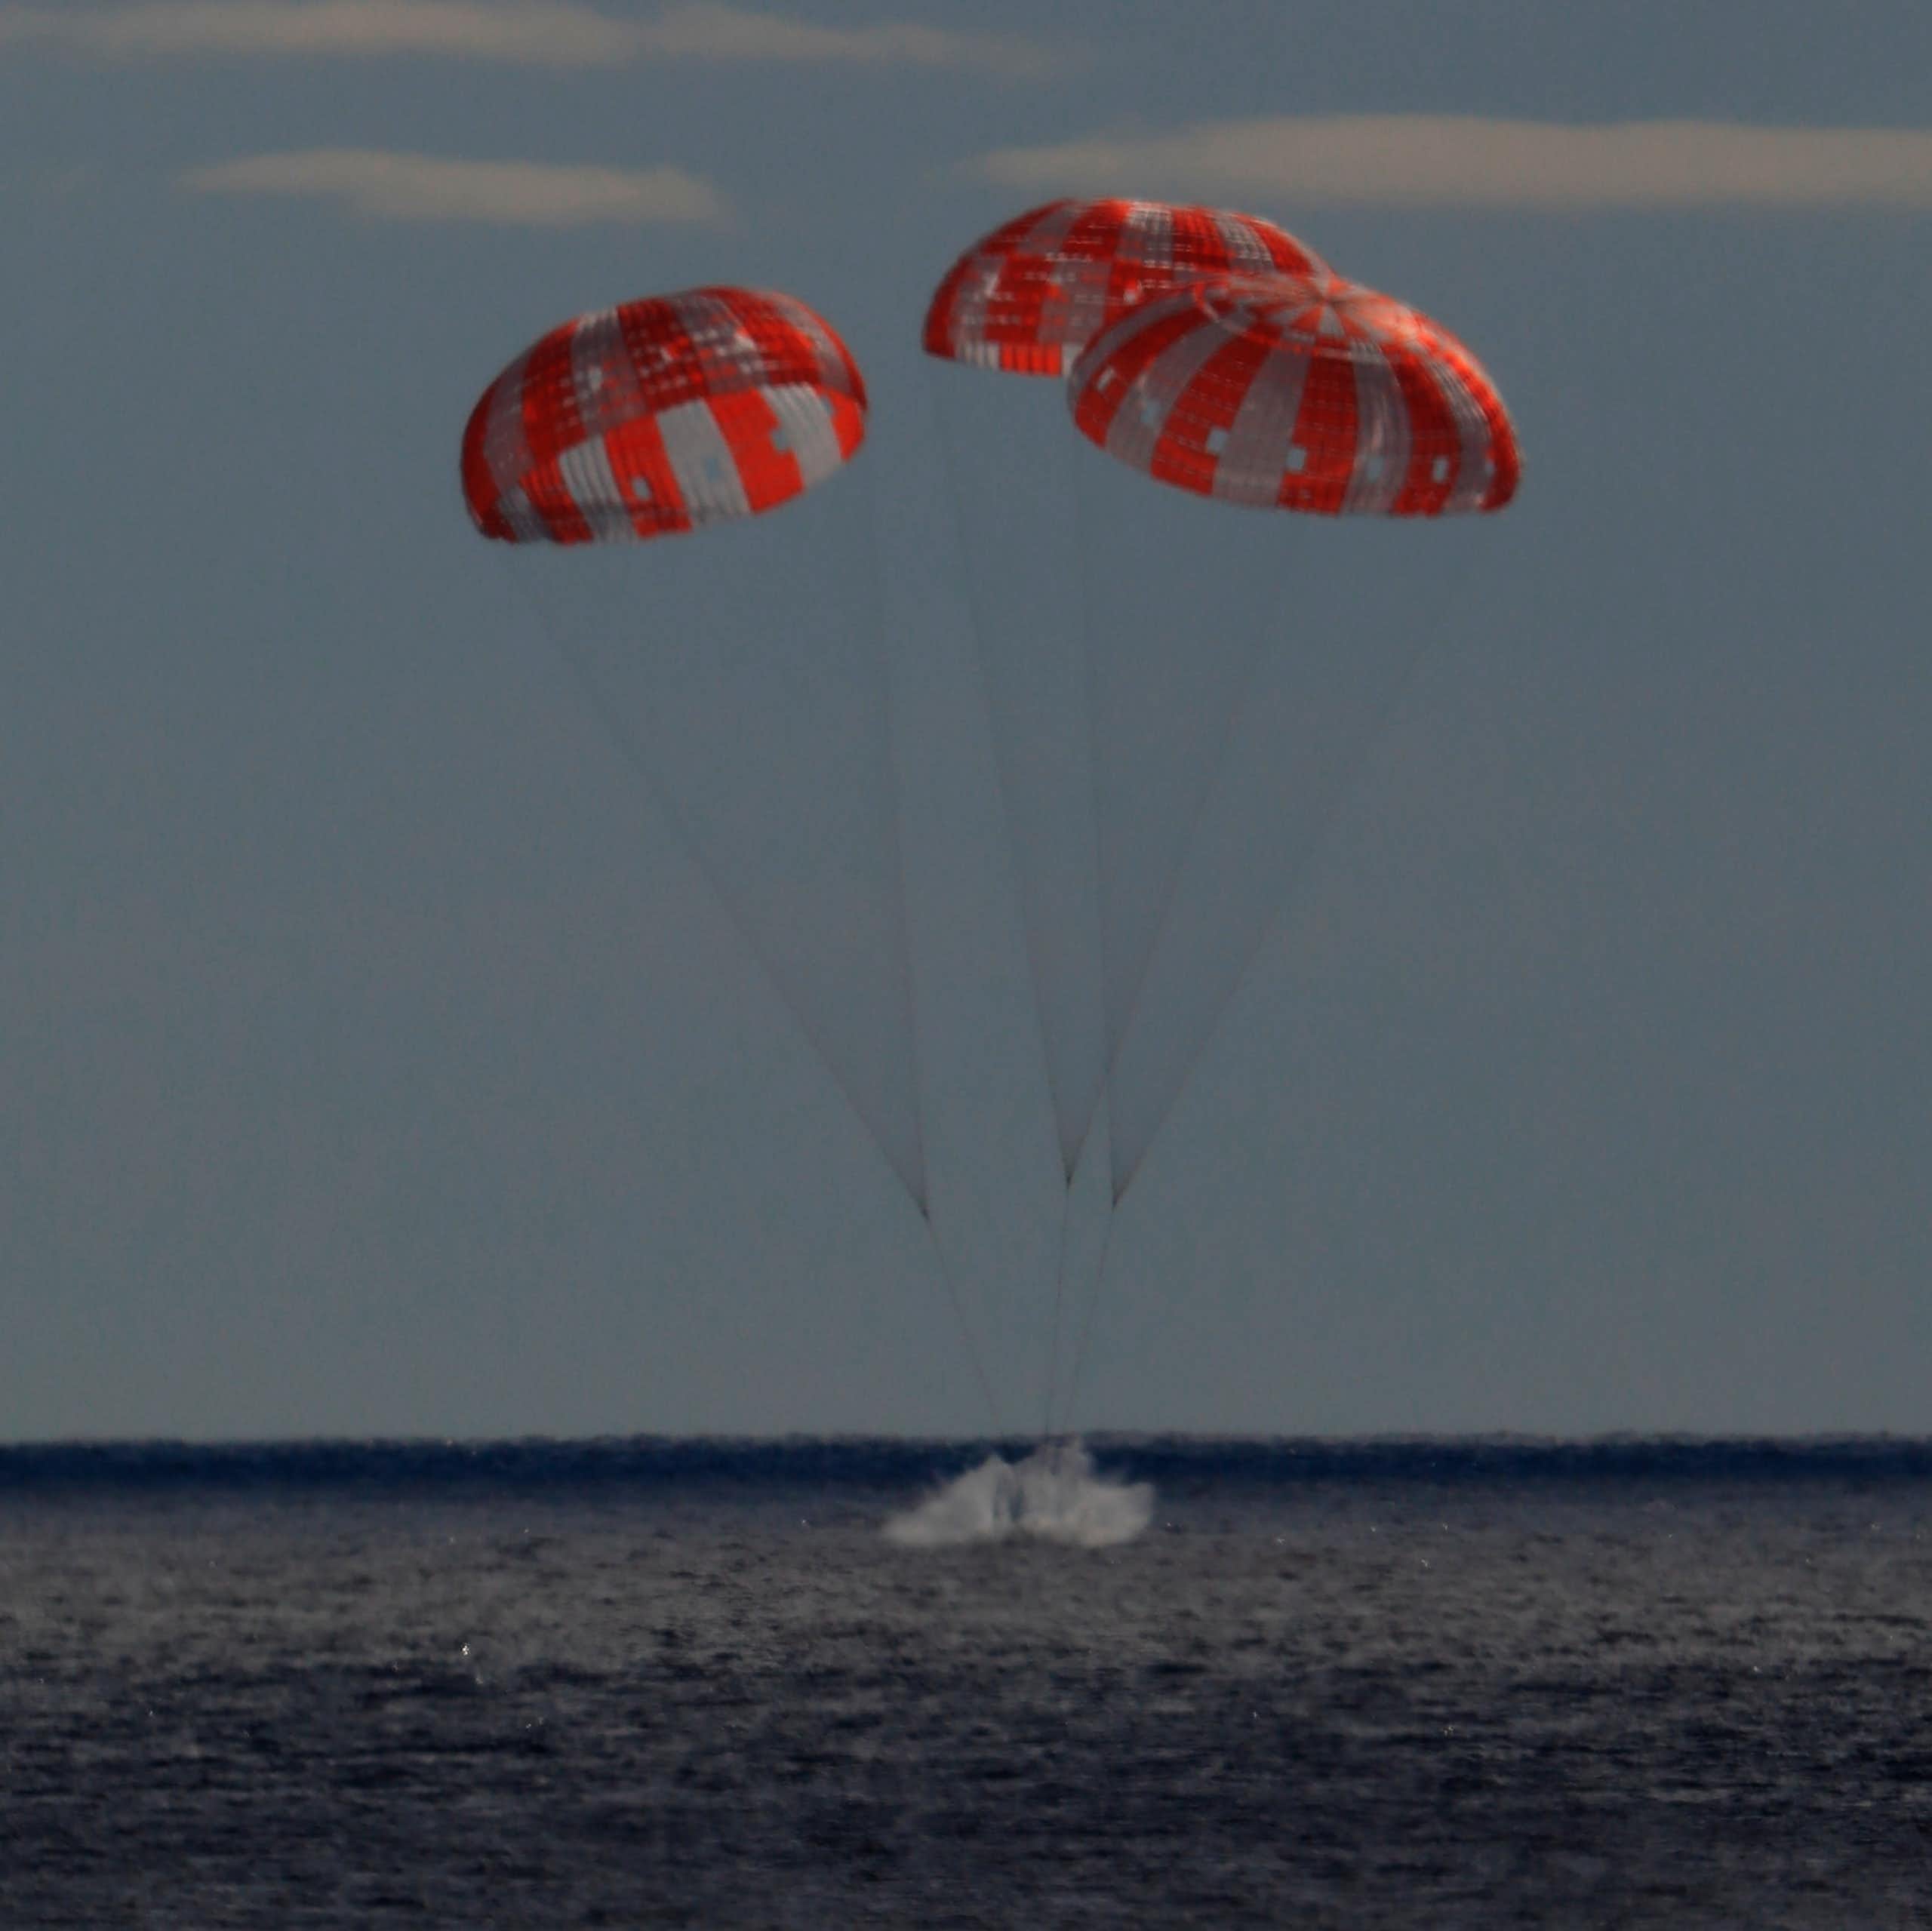 A small metal capsule carried by three parachutes lands in a body of water. 